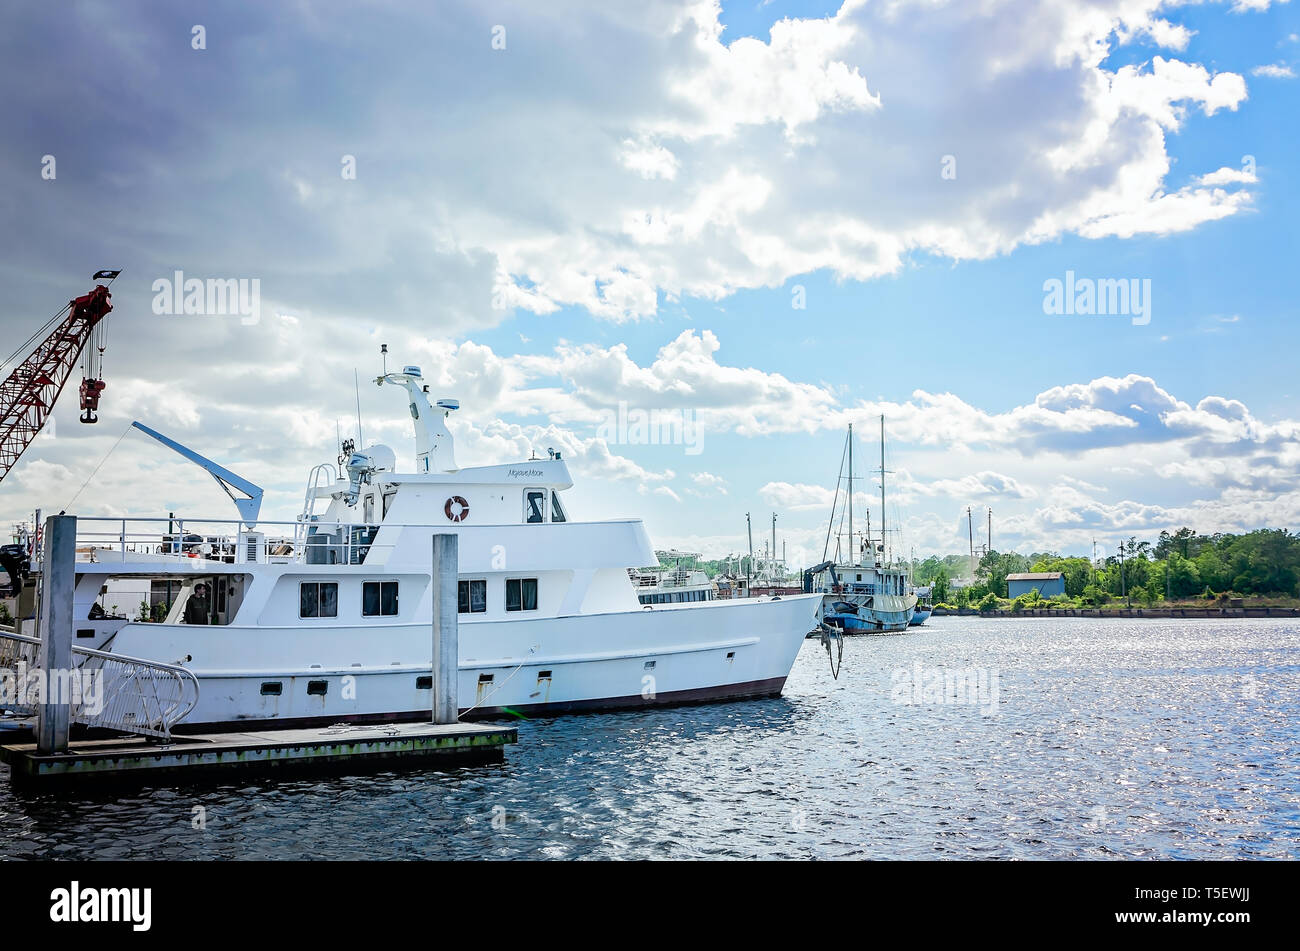 A commercial fishing vessel, Mojave Moon, is docked in Bayou La Batre, Alabama. Stock Photo